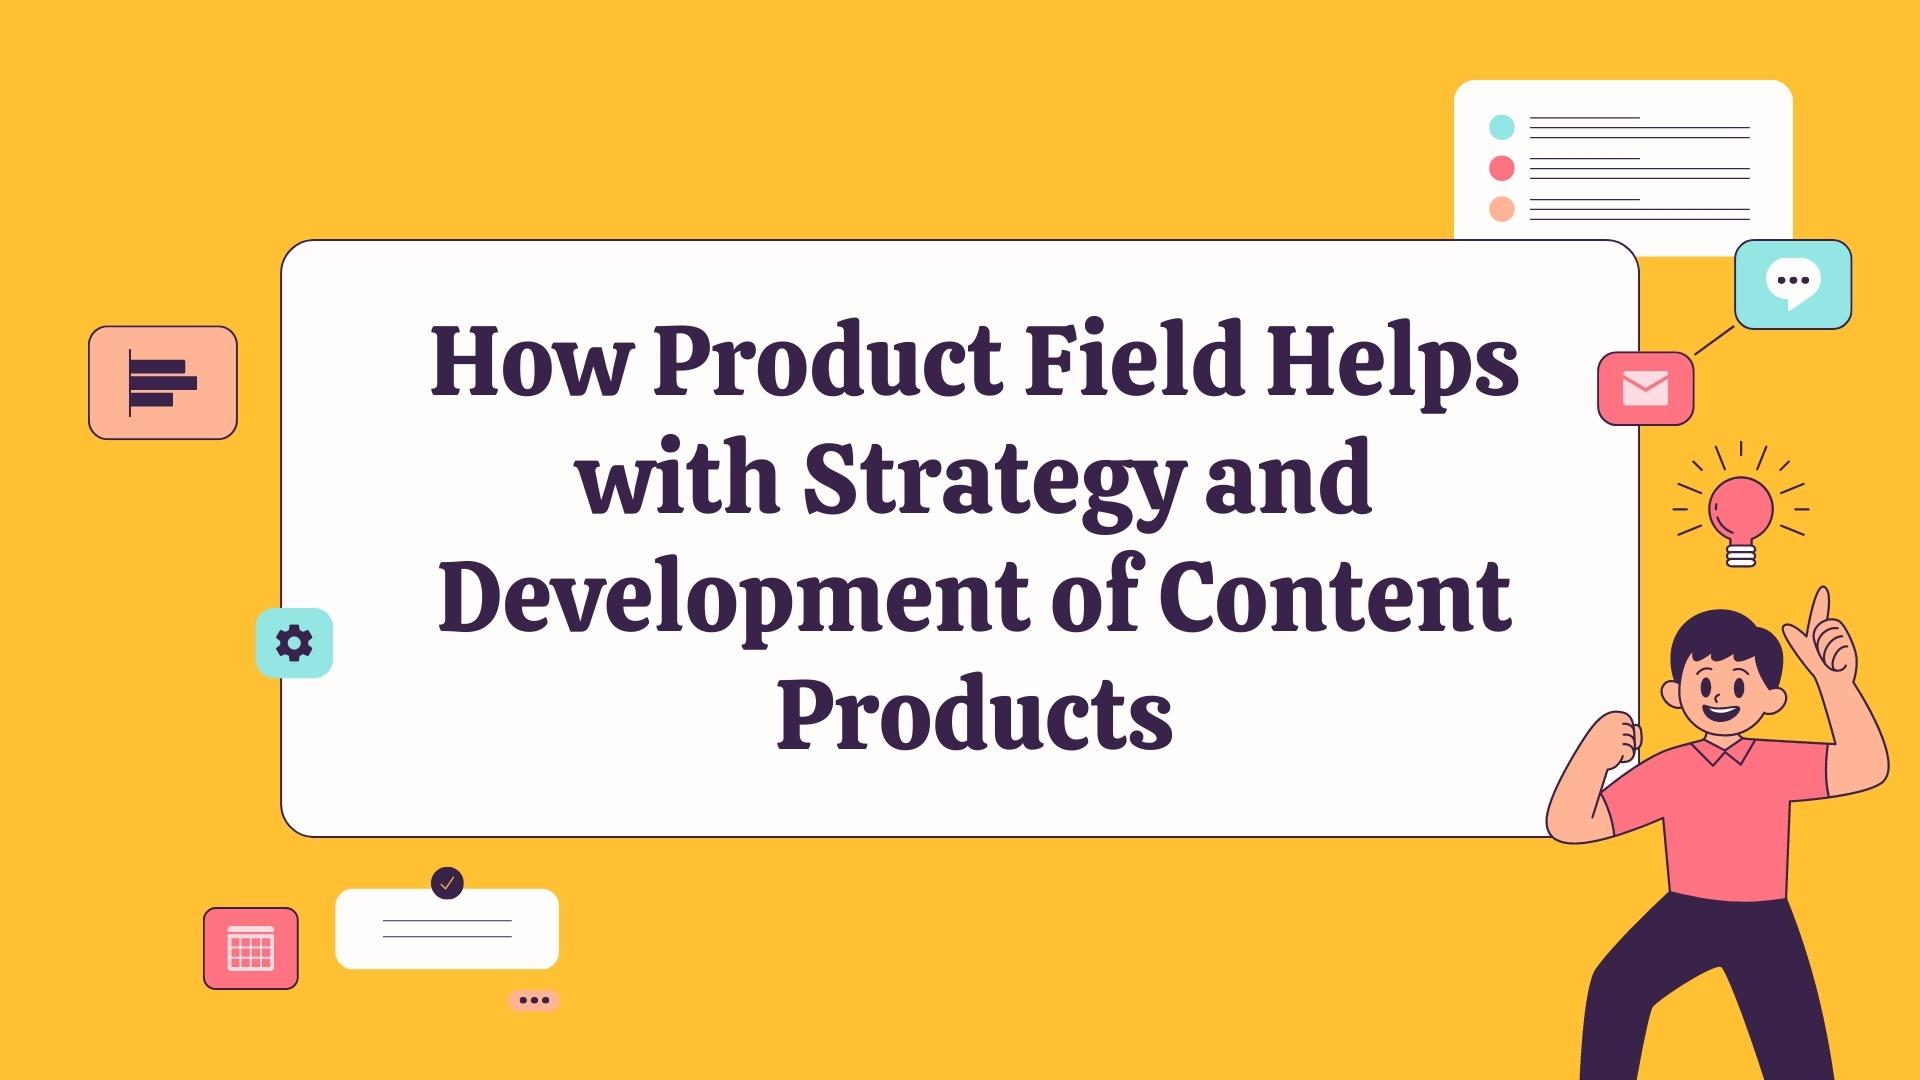 How Product Field Helps with Strategy and Development of Content Products